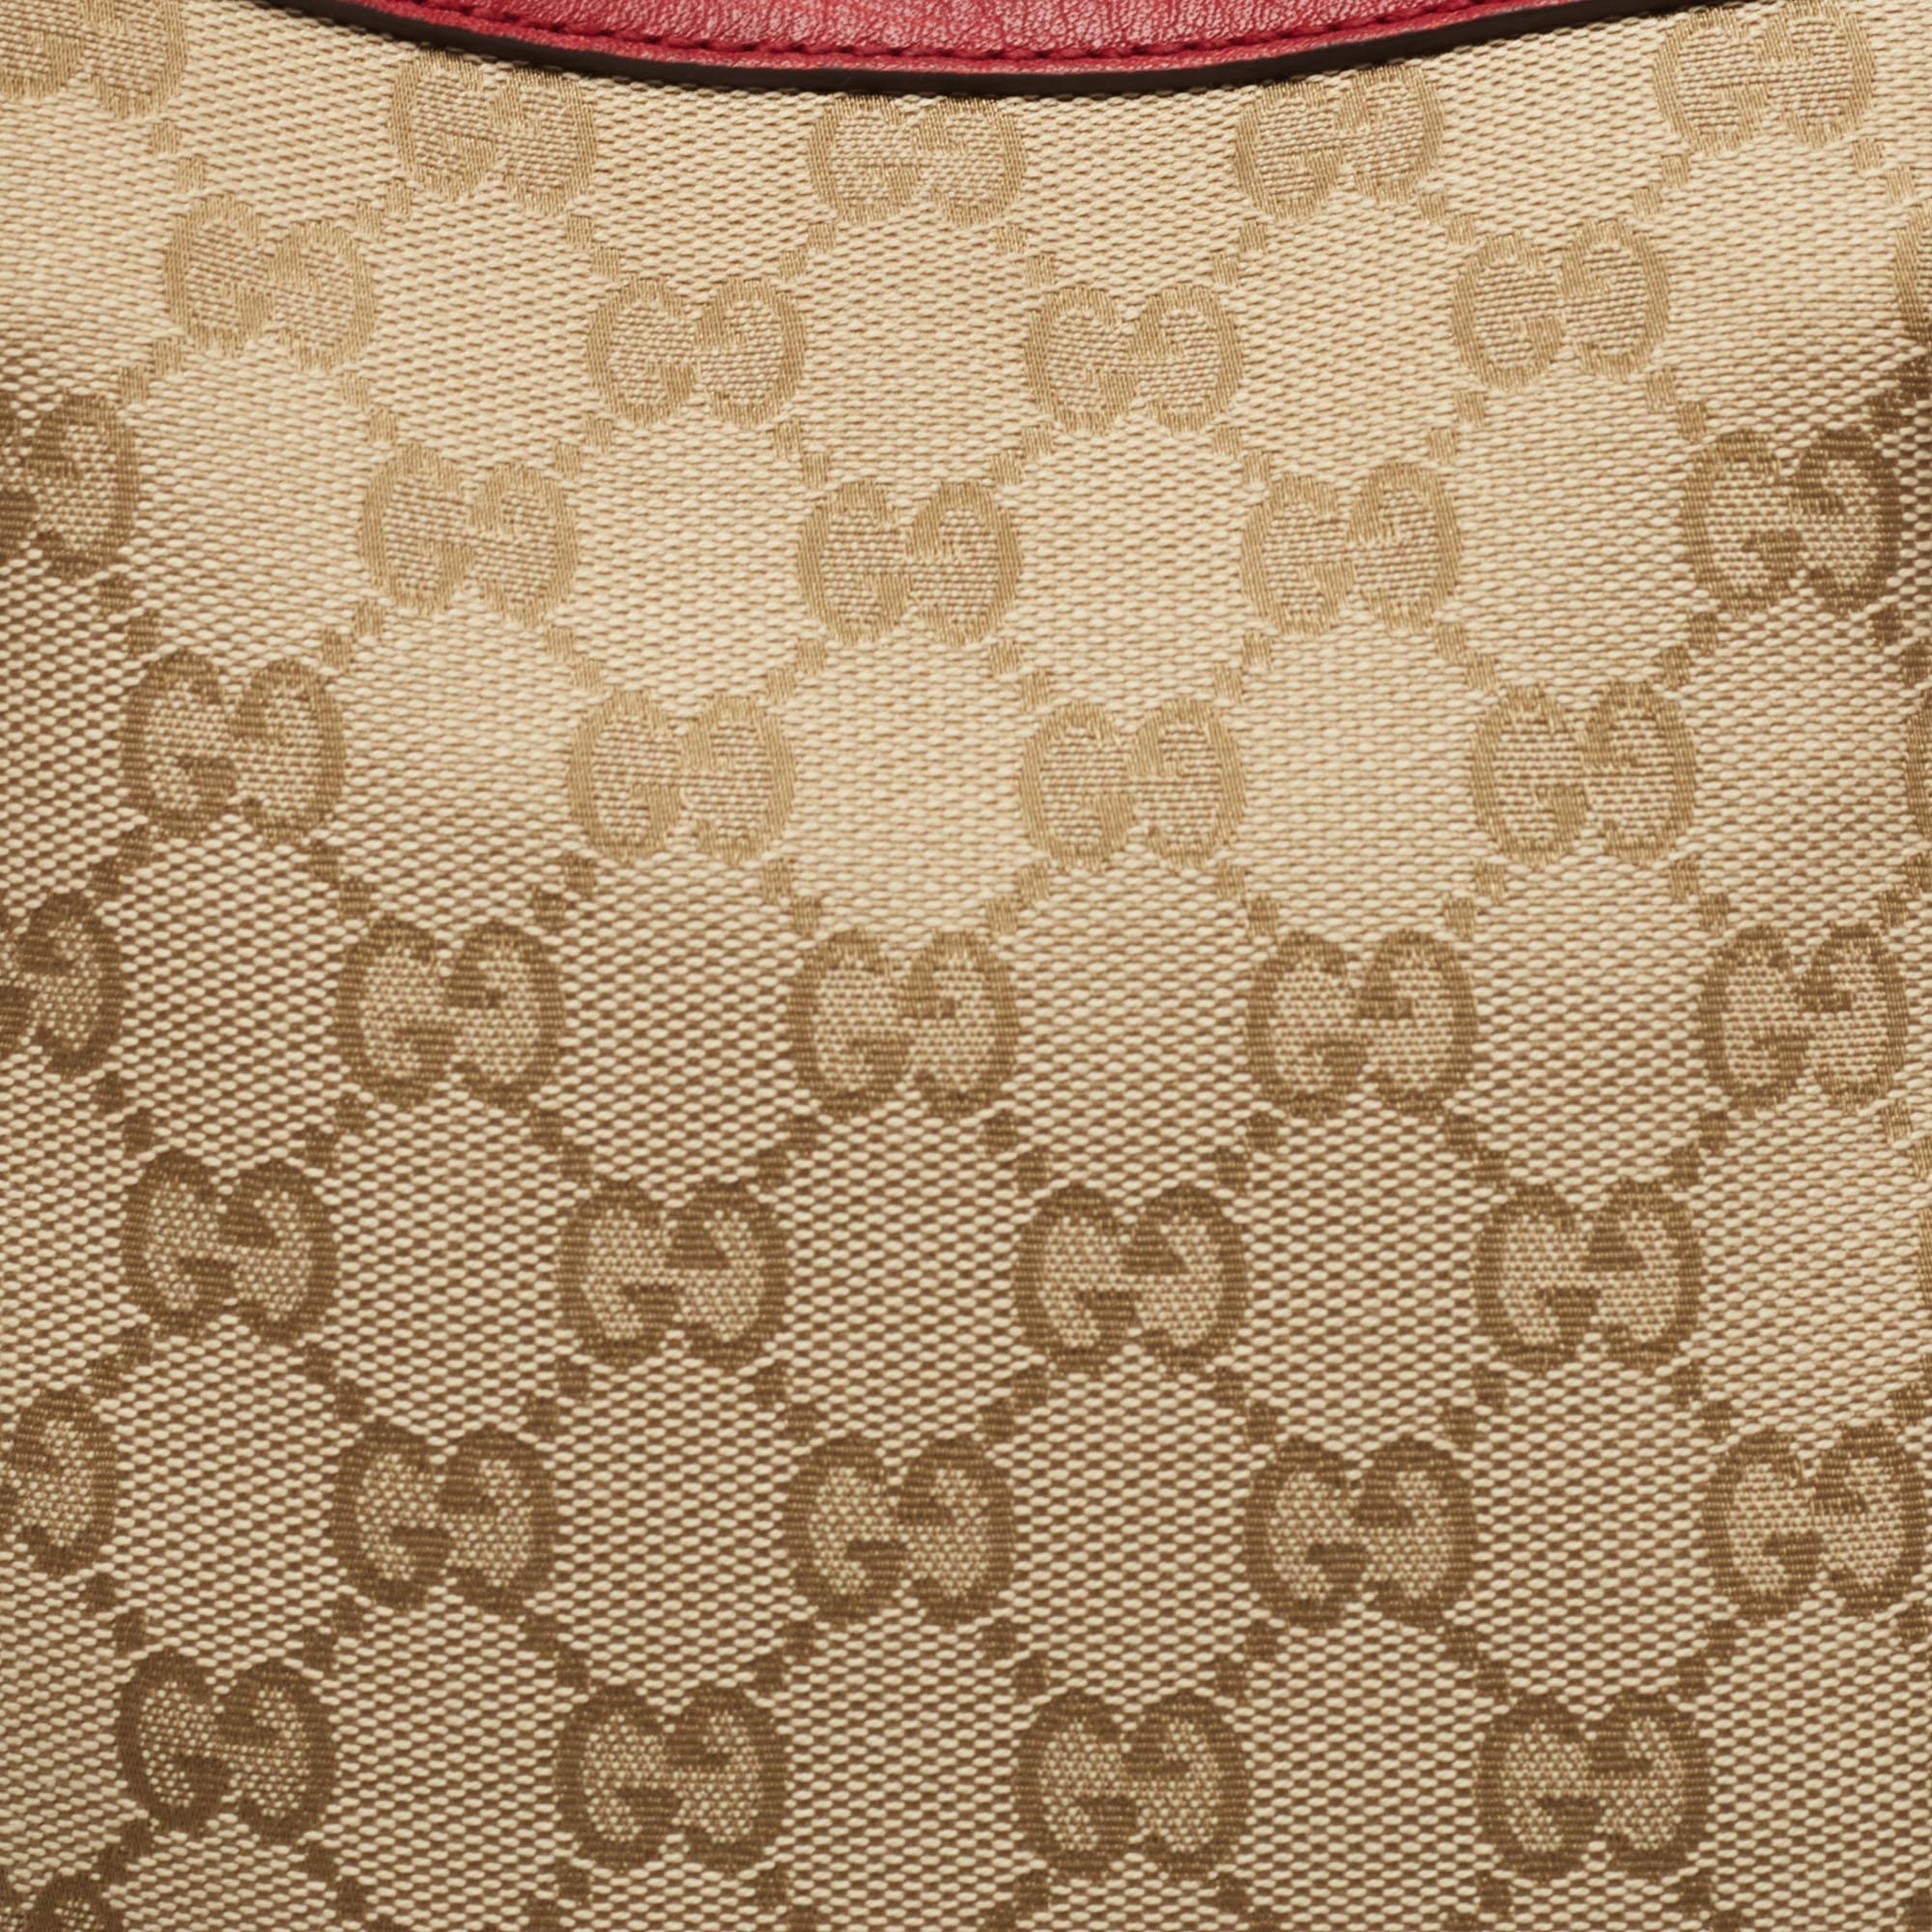 Gucci Beige/Red GG Canvas and Leather GG Interlocking Shopper Tote 9